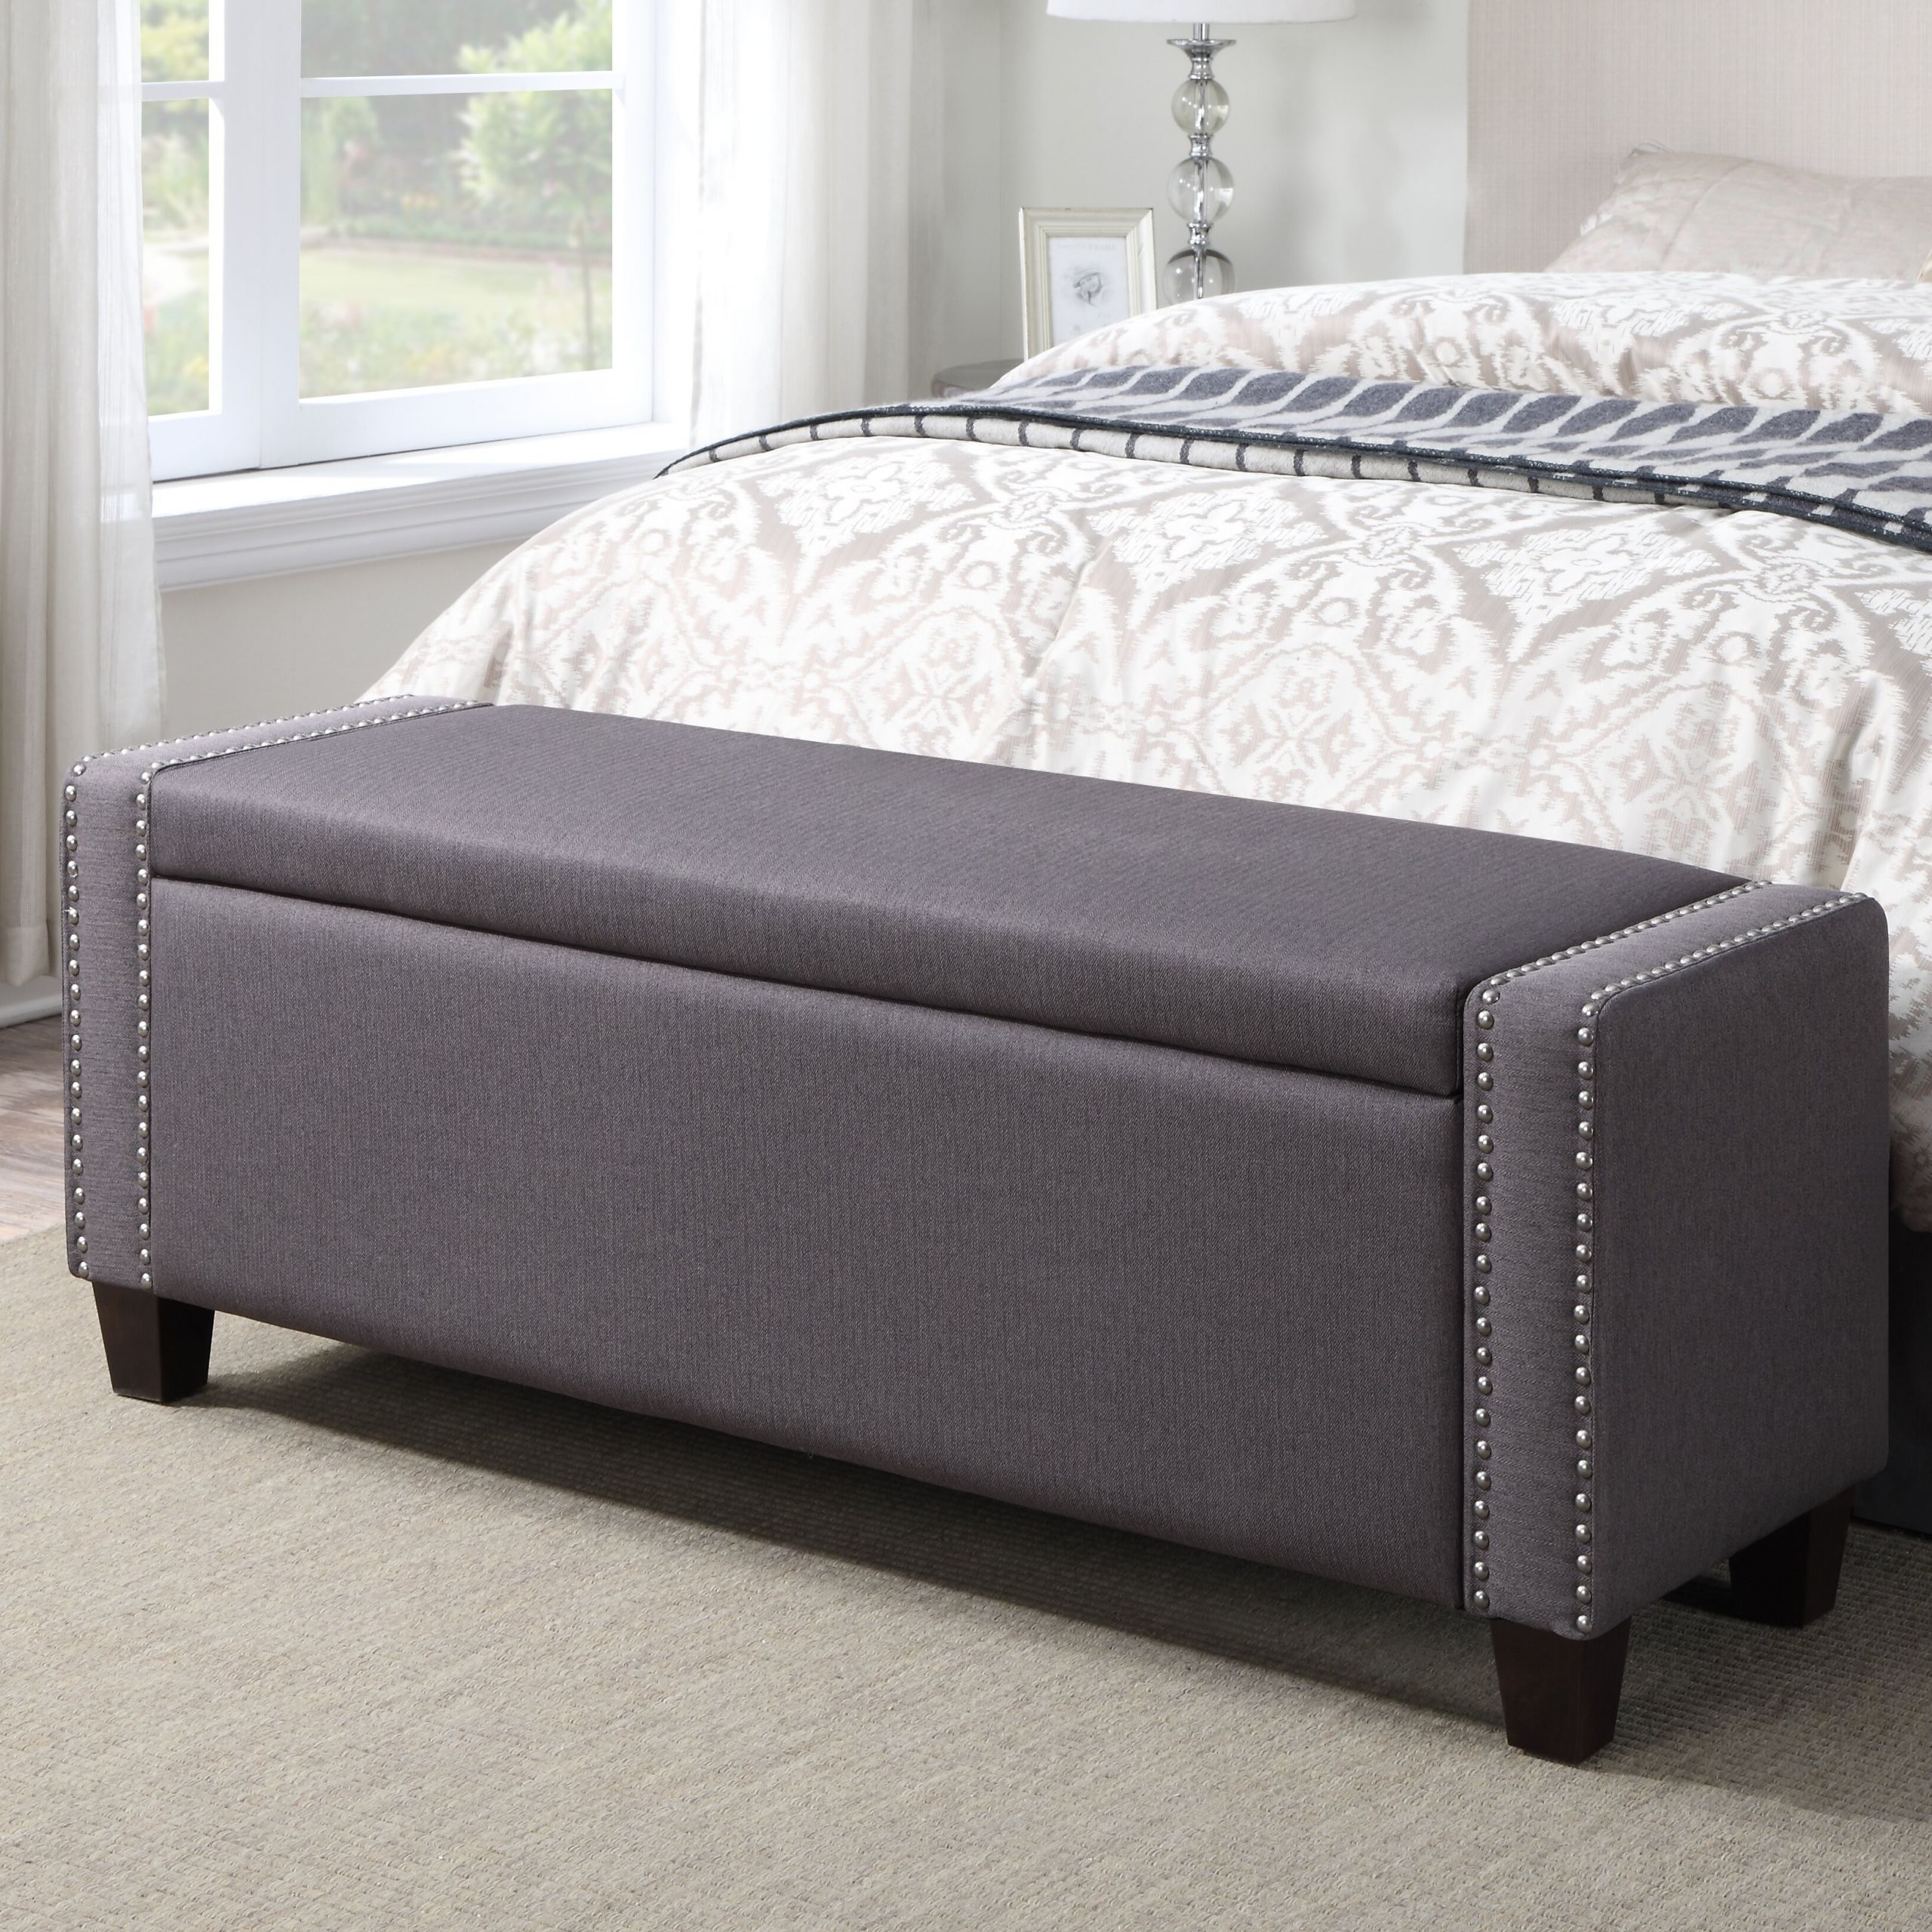 Bench For Bedroom With Storage
 House of Hampton Gistel Upholstered Storage Bedroom Bench